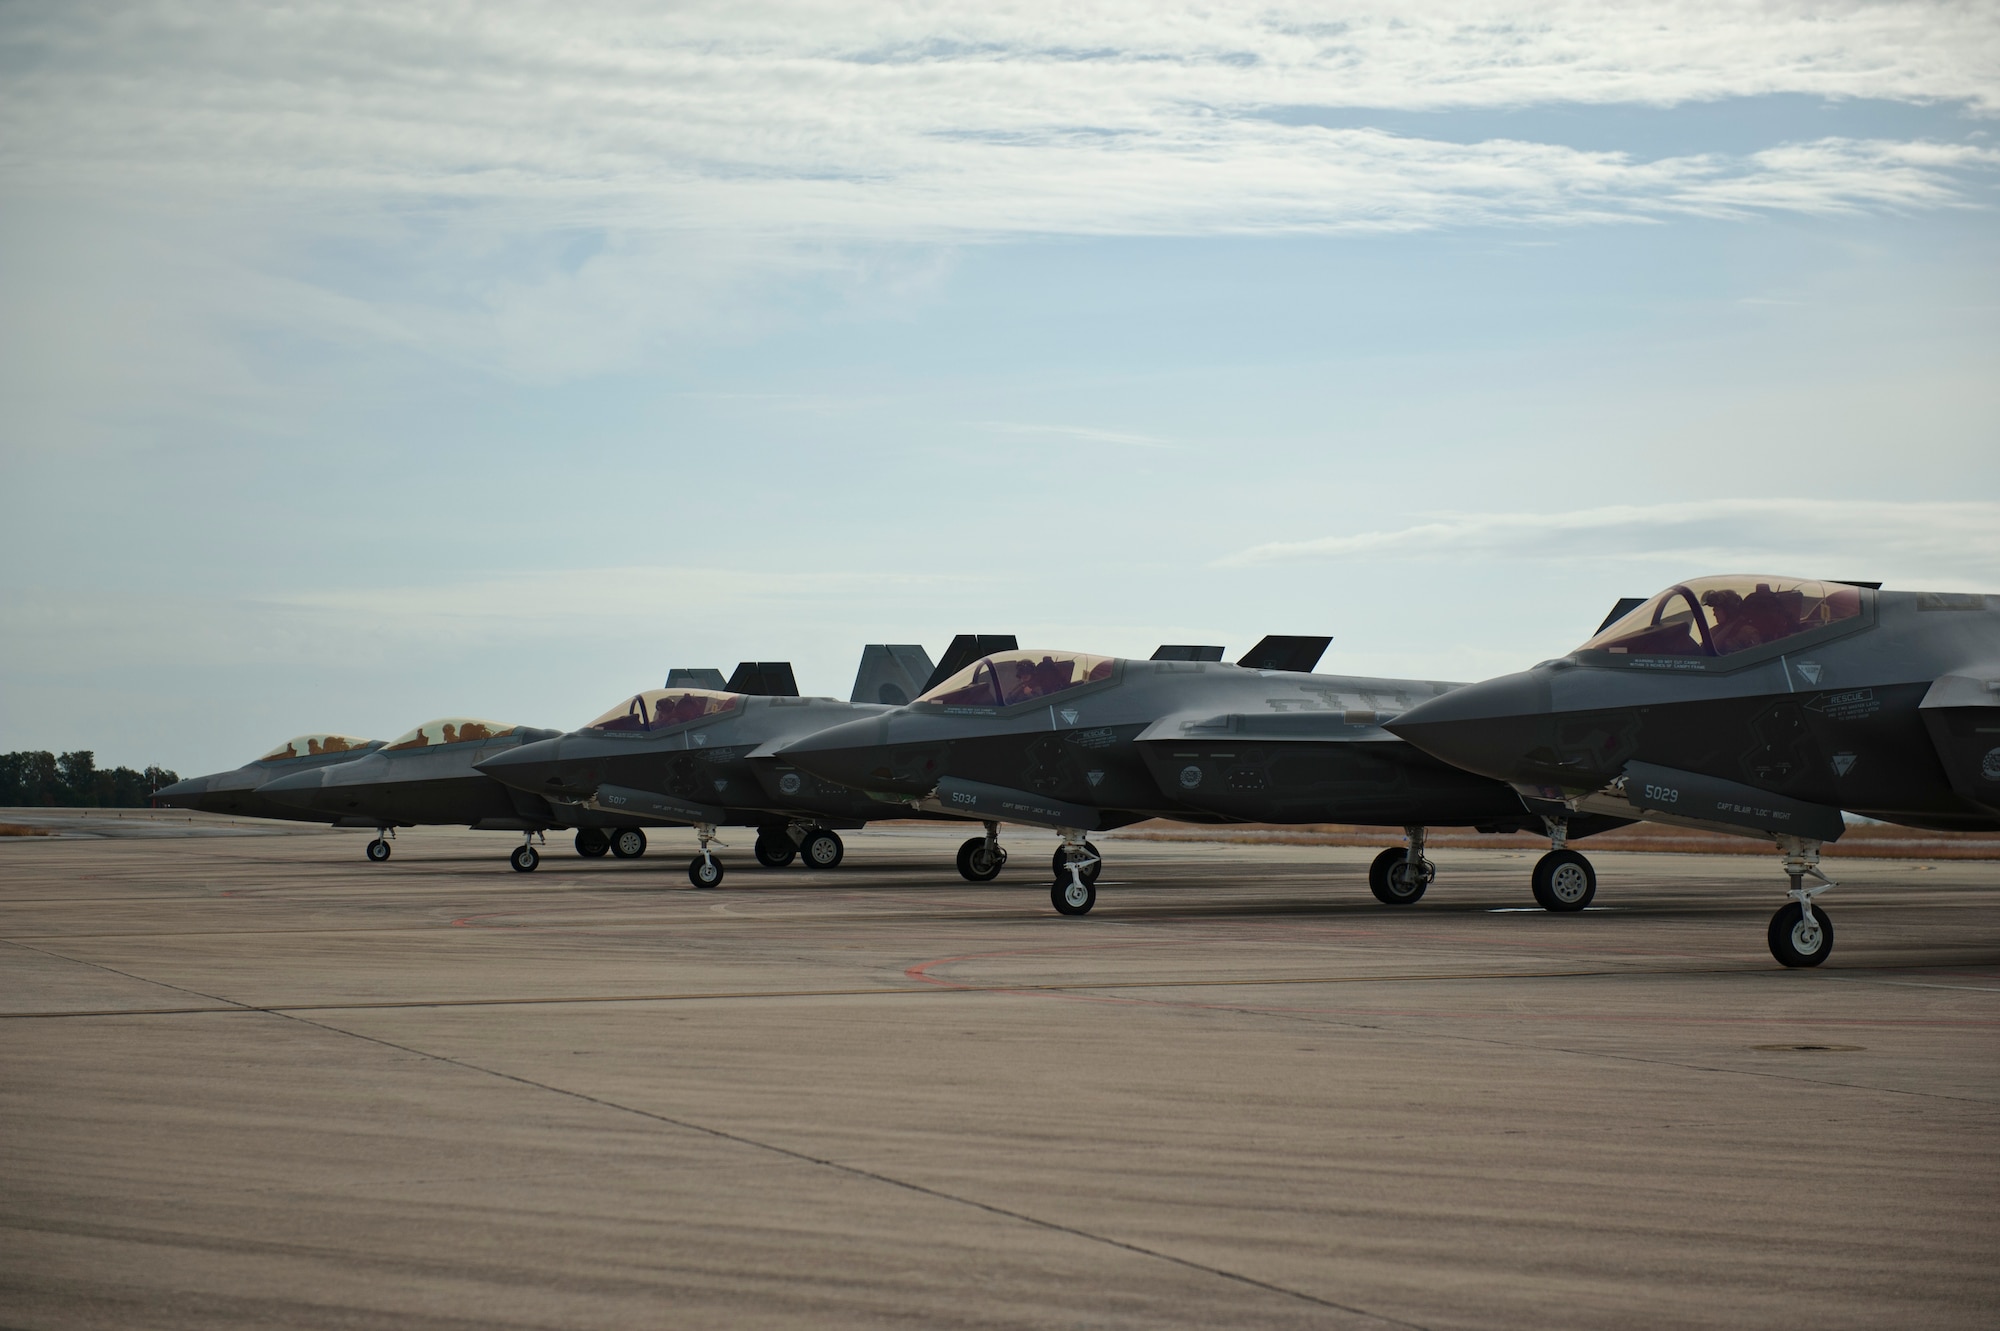 F-22 Raptors from the 94th Fighter Squadron, Joint Base Langley-Eustis, Virginia, and F-35A Lightning IIs from the 58th Fighter Squadron, Eglin Air Force Base, Florida, perform final preflight checks before taking off for an integration training mission on Eglin Training Range, Florida, Nov. 6, 2014. The U.S. Air Force deployed four F-22 Raptors from Joint Base Langley-Eustis, Virginia, to Eglin Air Force Base, Florida, for the first operational integration training mission with the F-35A Lightning II assigned to the 33rd Fighter Wing. The purpose of the training was to improve integrated employment of fifth-generation assets and tactics. (U.S. Air Force photo/Staff Sgt. Marleah Robertson)